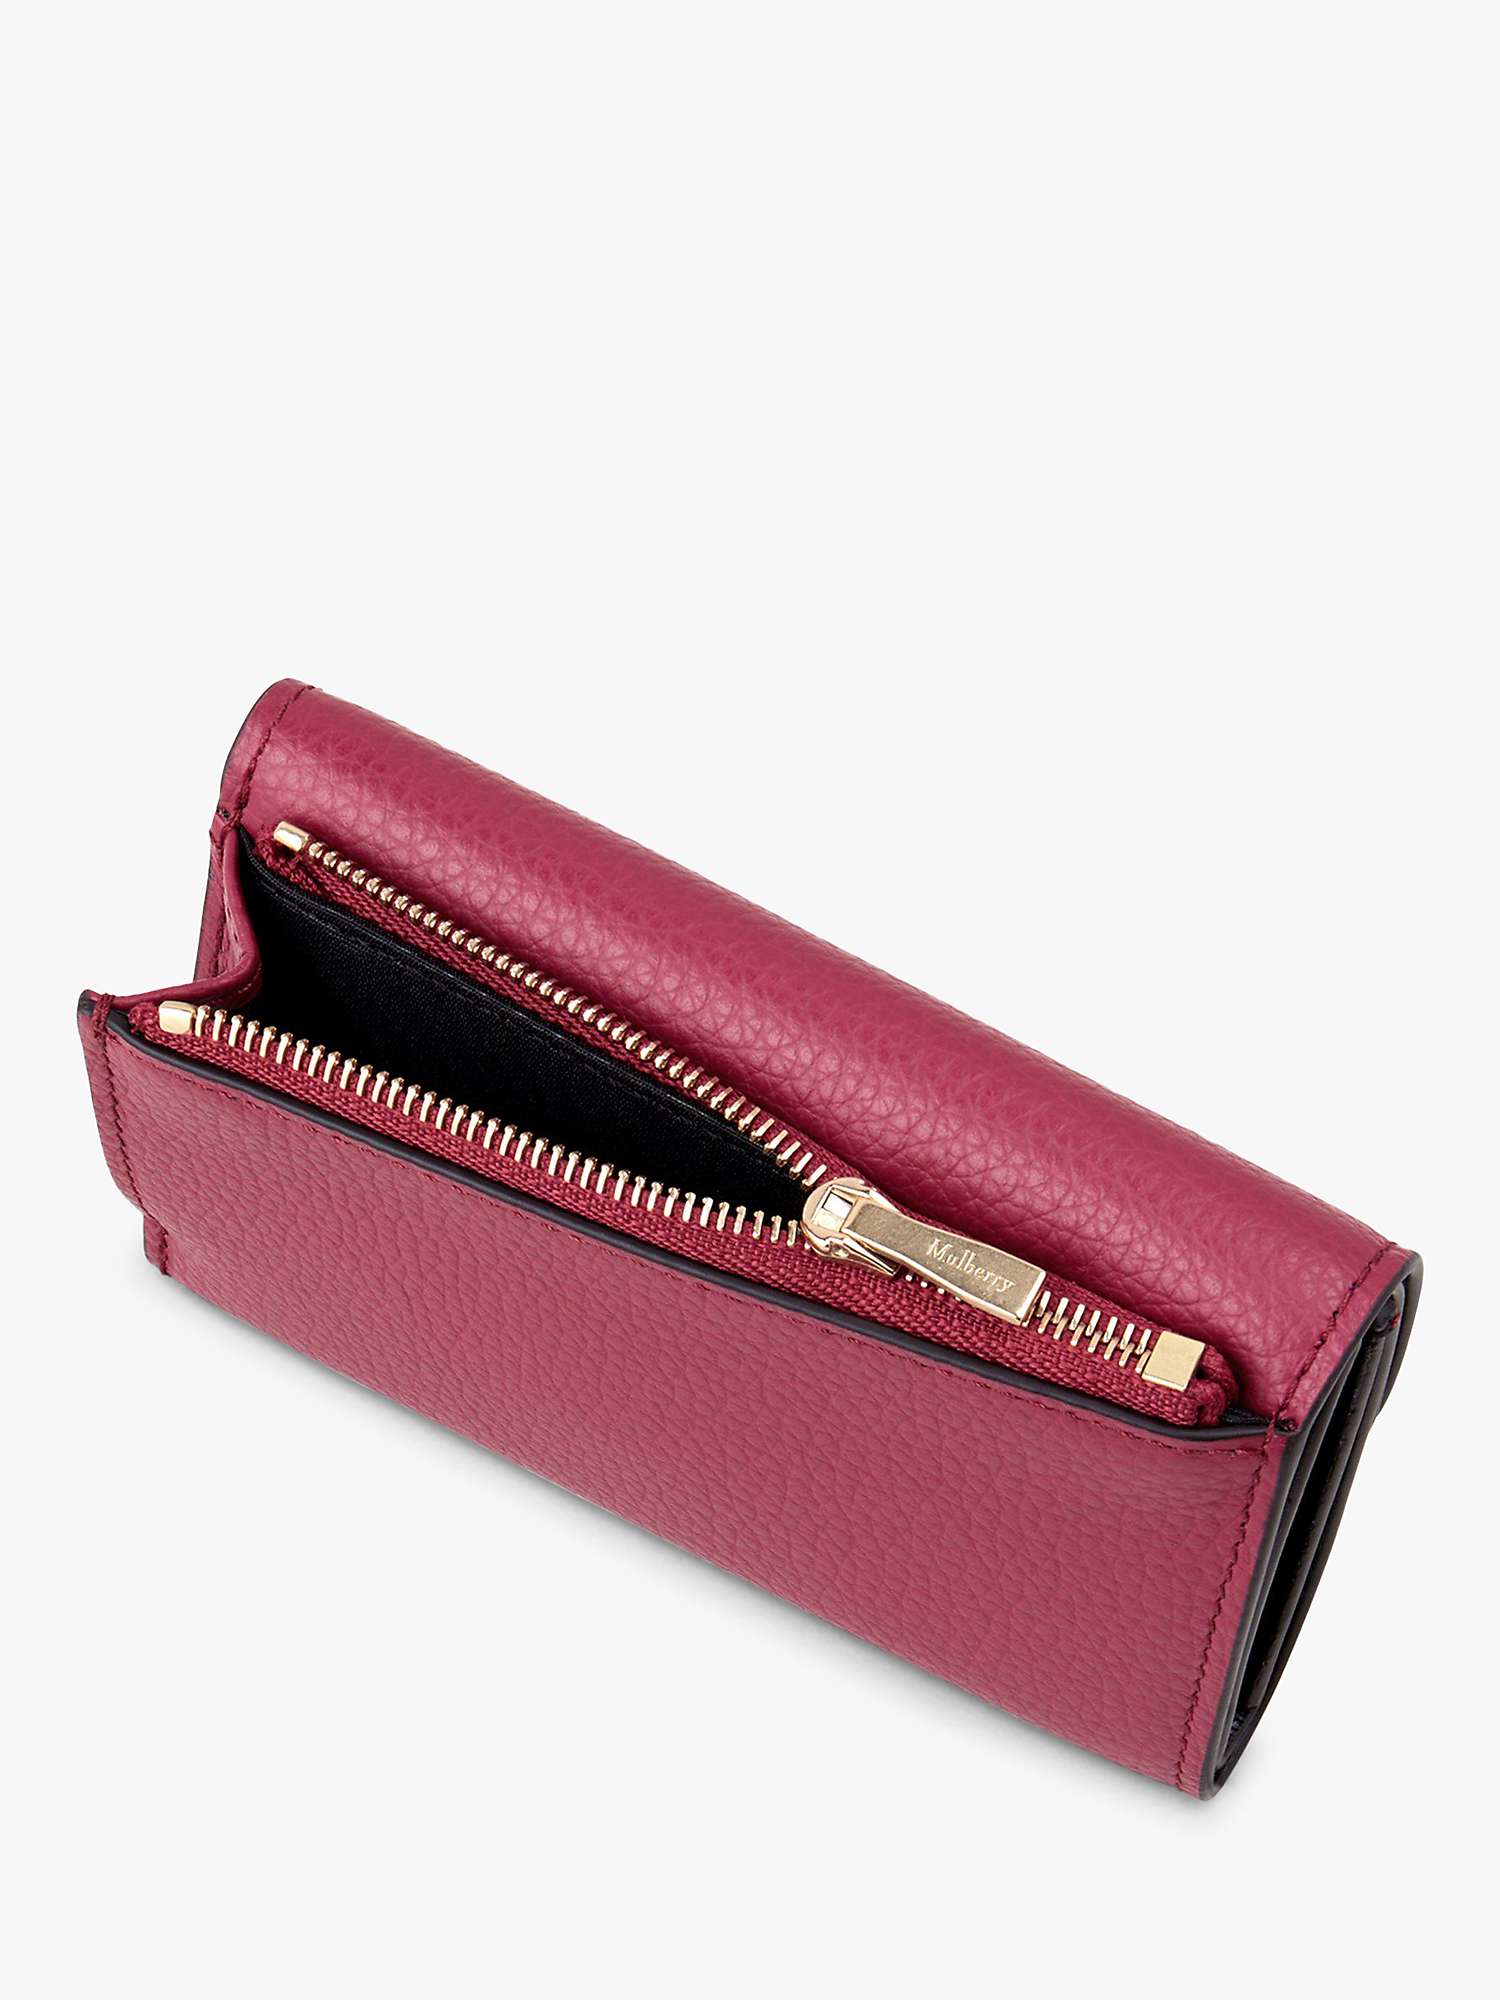 Buy Mulberry Darley High Shine Leather Folded Multi-Card Wallet Online at johnlewis.com